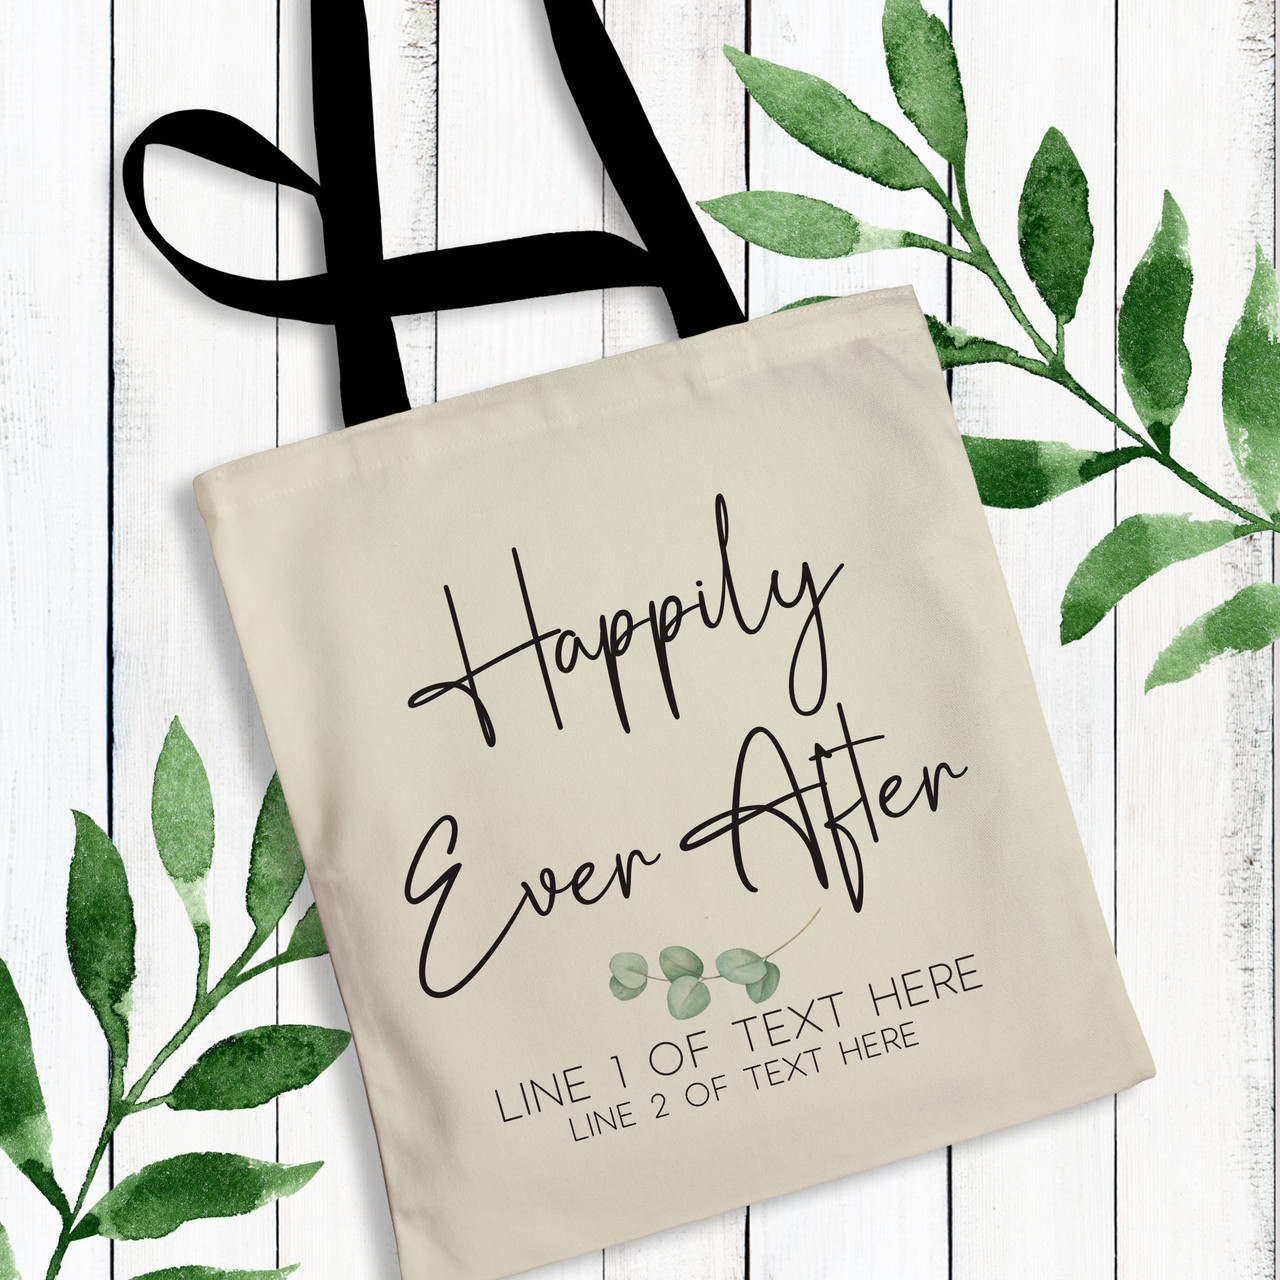 Personalized Wedding Welcome Tote Bags, Palm Springs Wedding Favors